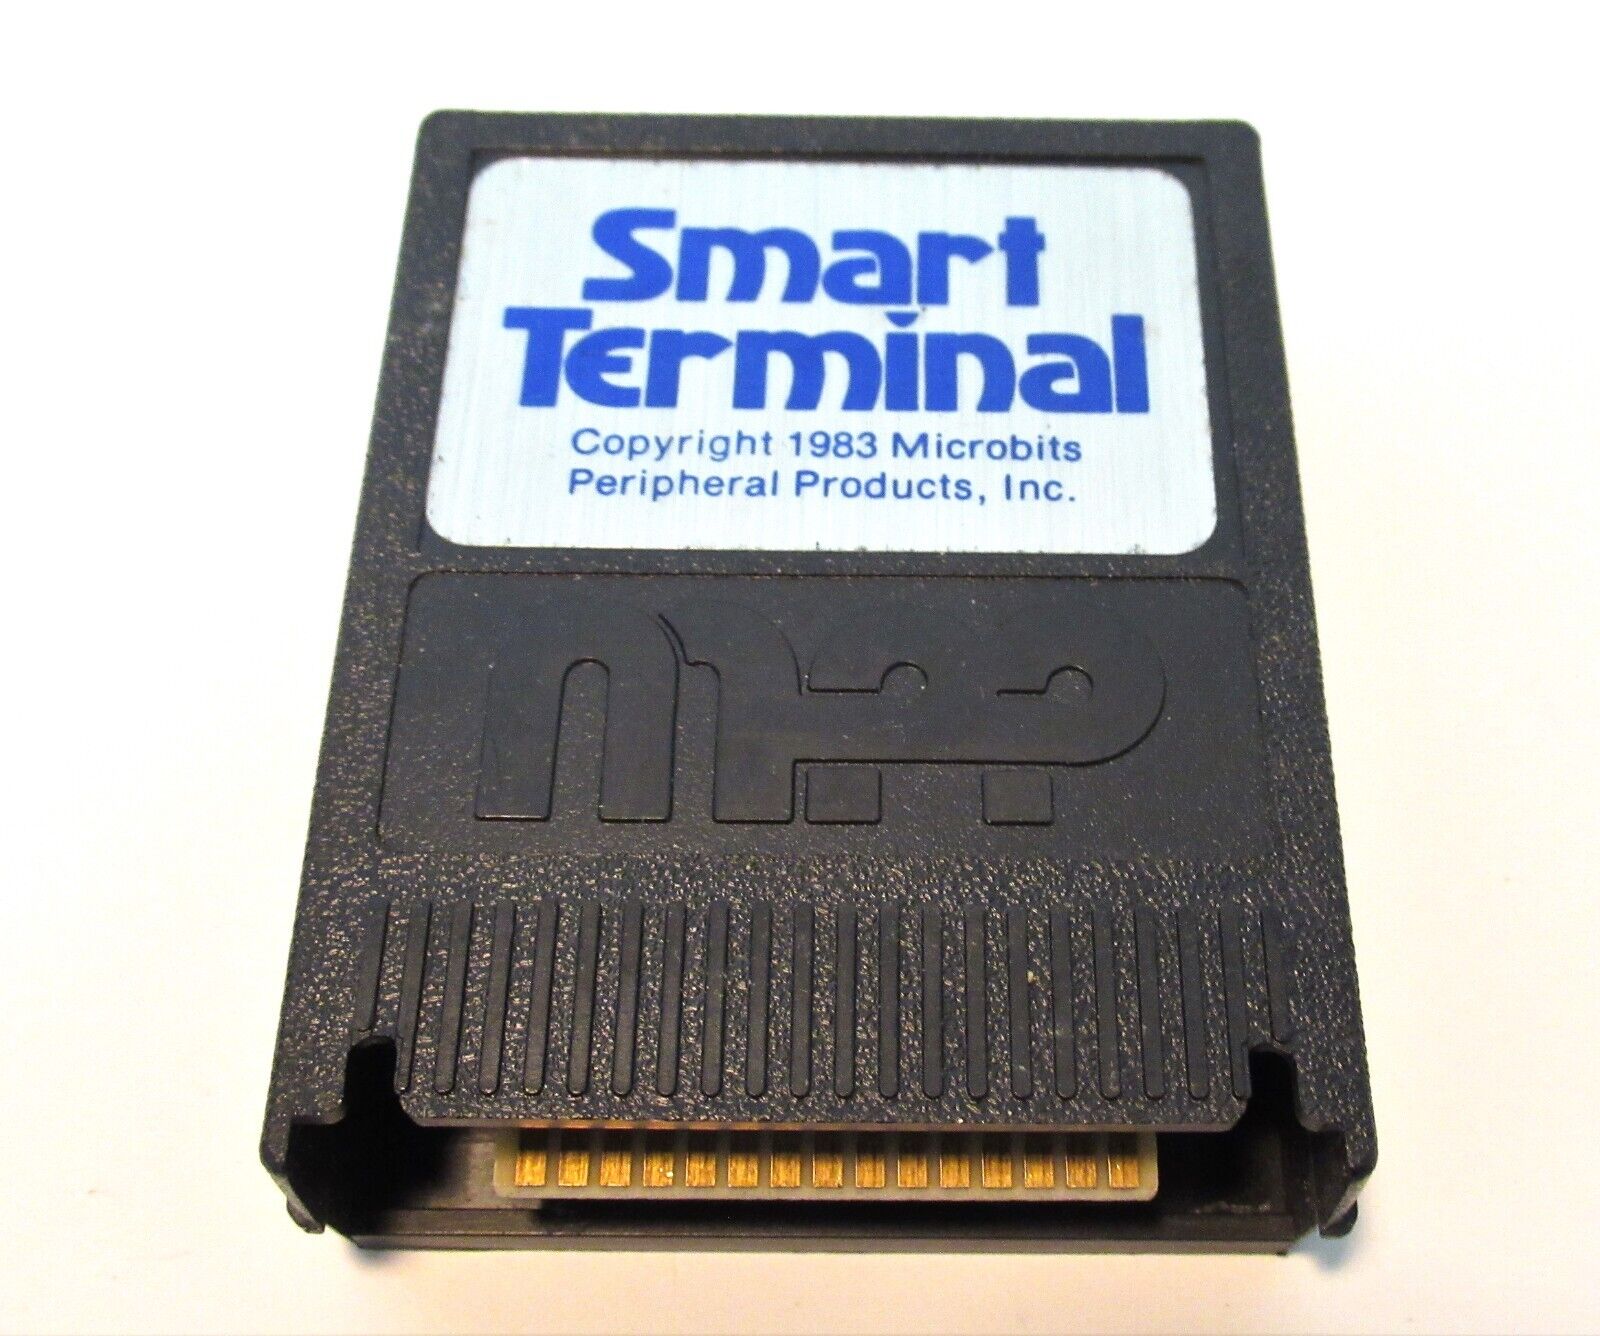 VINTAGE SMART TERMINAL 1983 MICROBITS PERIPHERAL PRODUCTS, INC. MPP TESTED